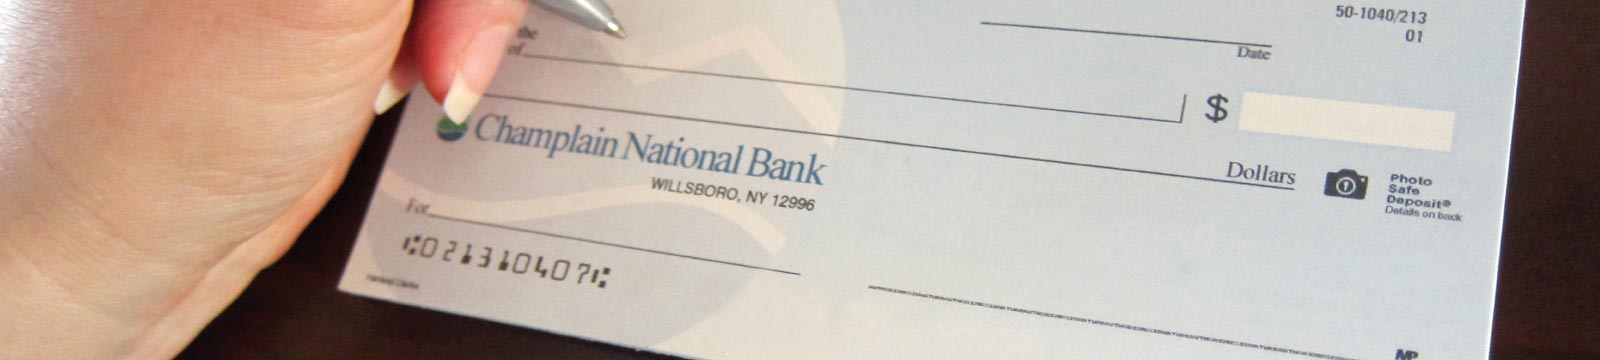 Bank Check with Hand and Pen